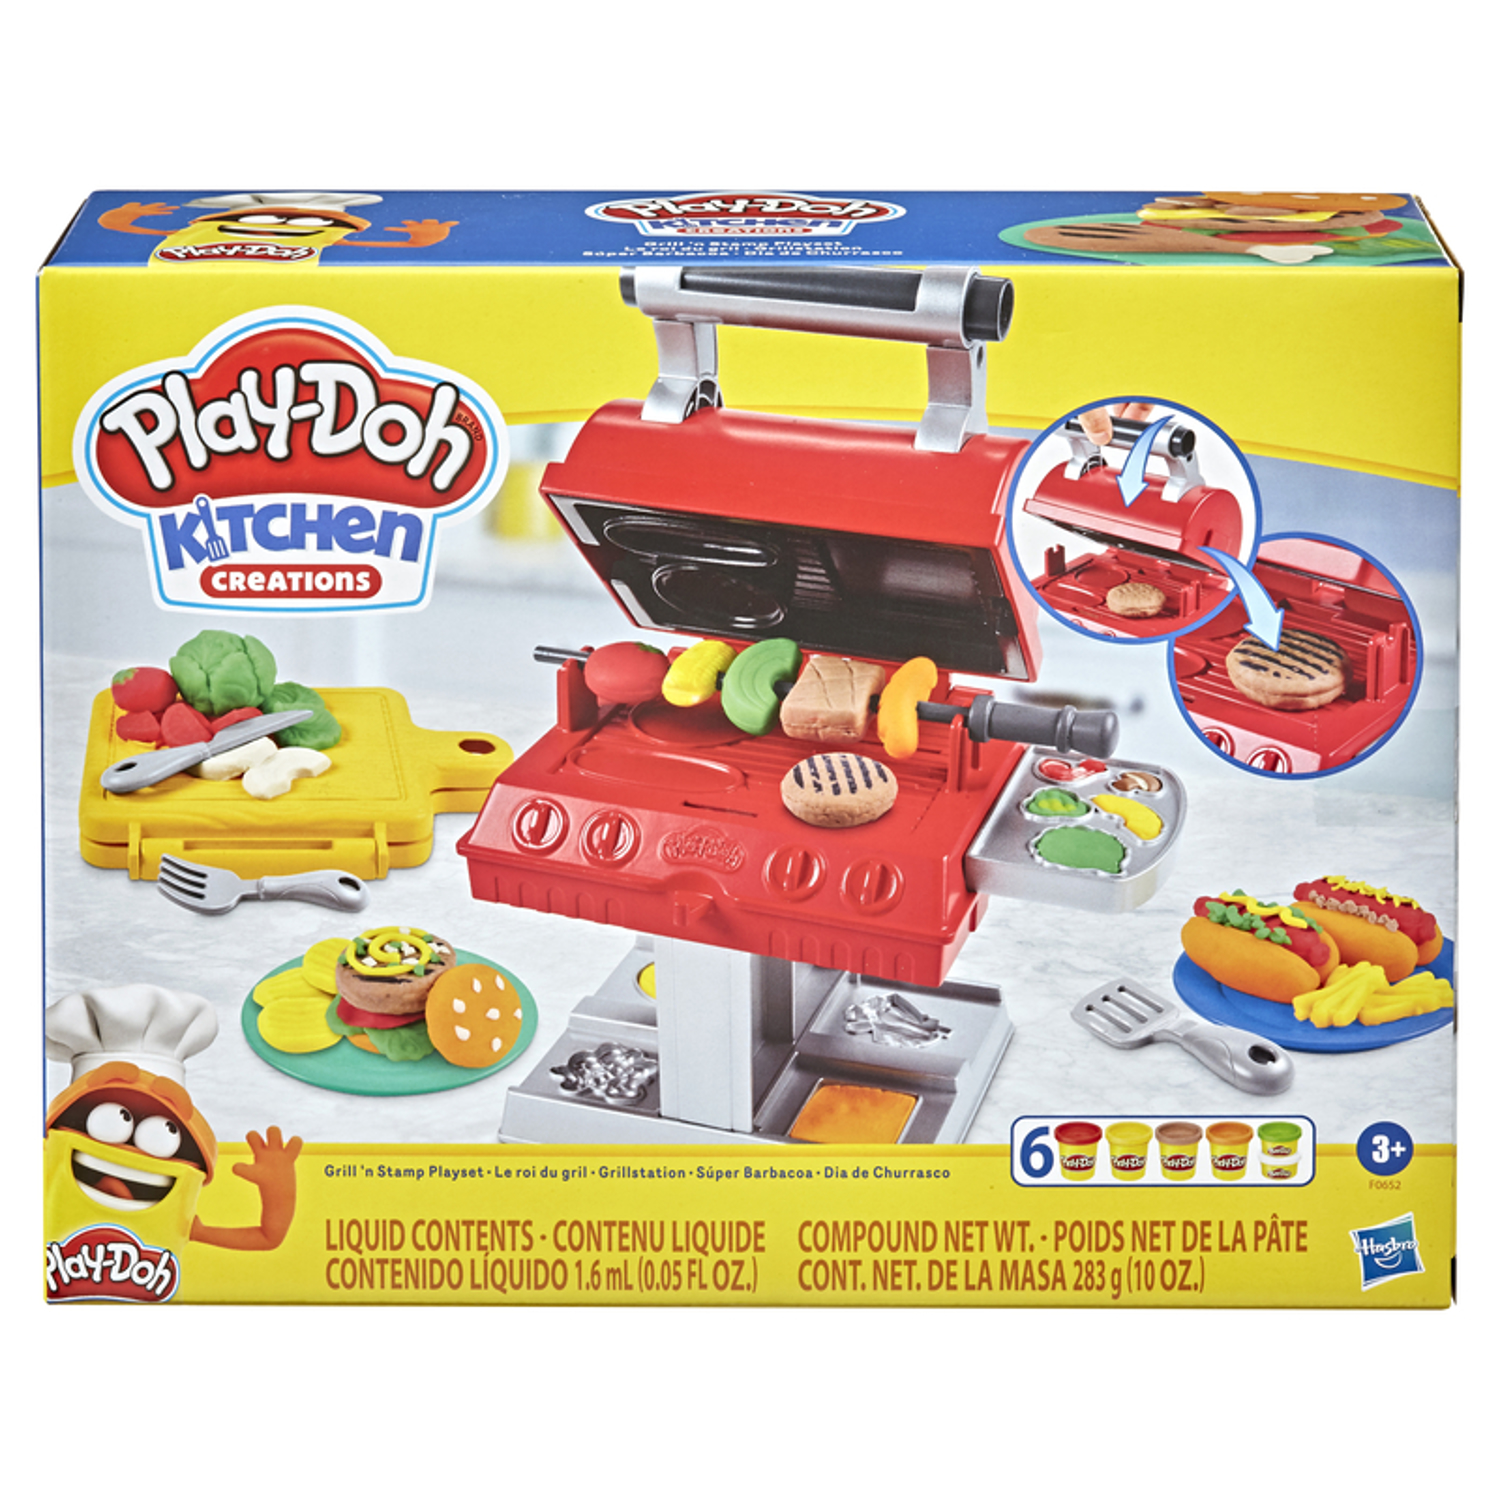 Photos - Other interior and decor Hasbro Play-Doh Kitchen Creations BBQ Grill Playset Multicolored 14 pc HSB 